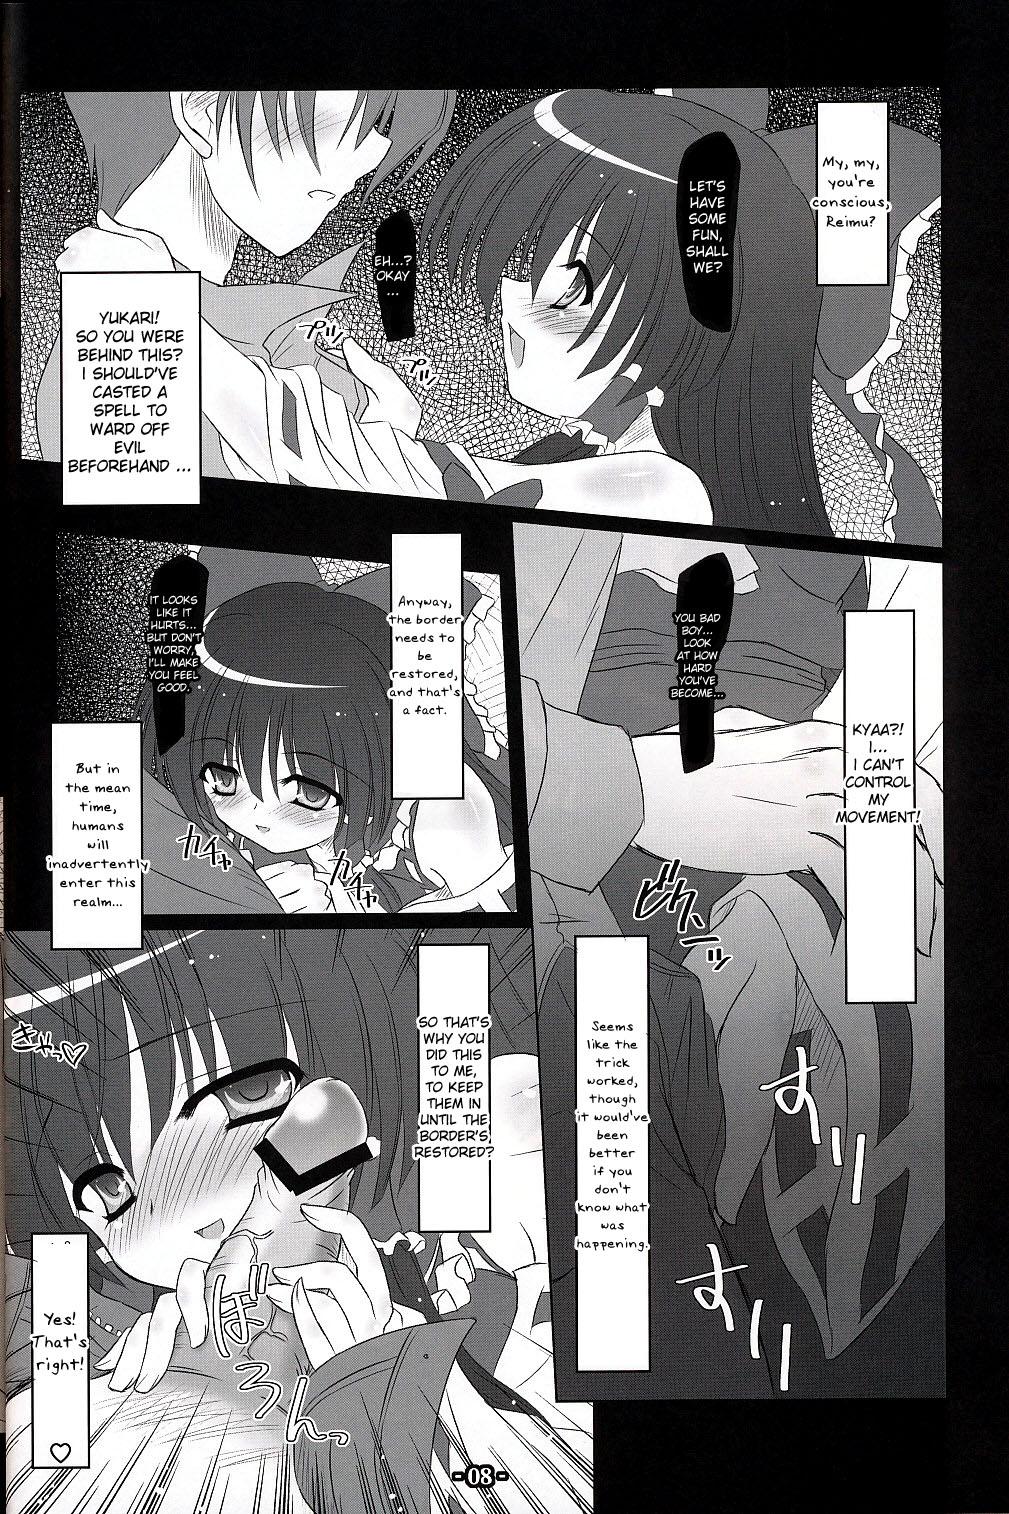 Slapping Musou Fuuin - Touhou project Shoes - Page 7